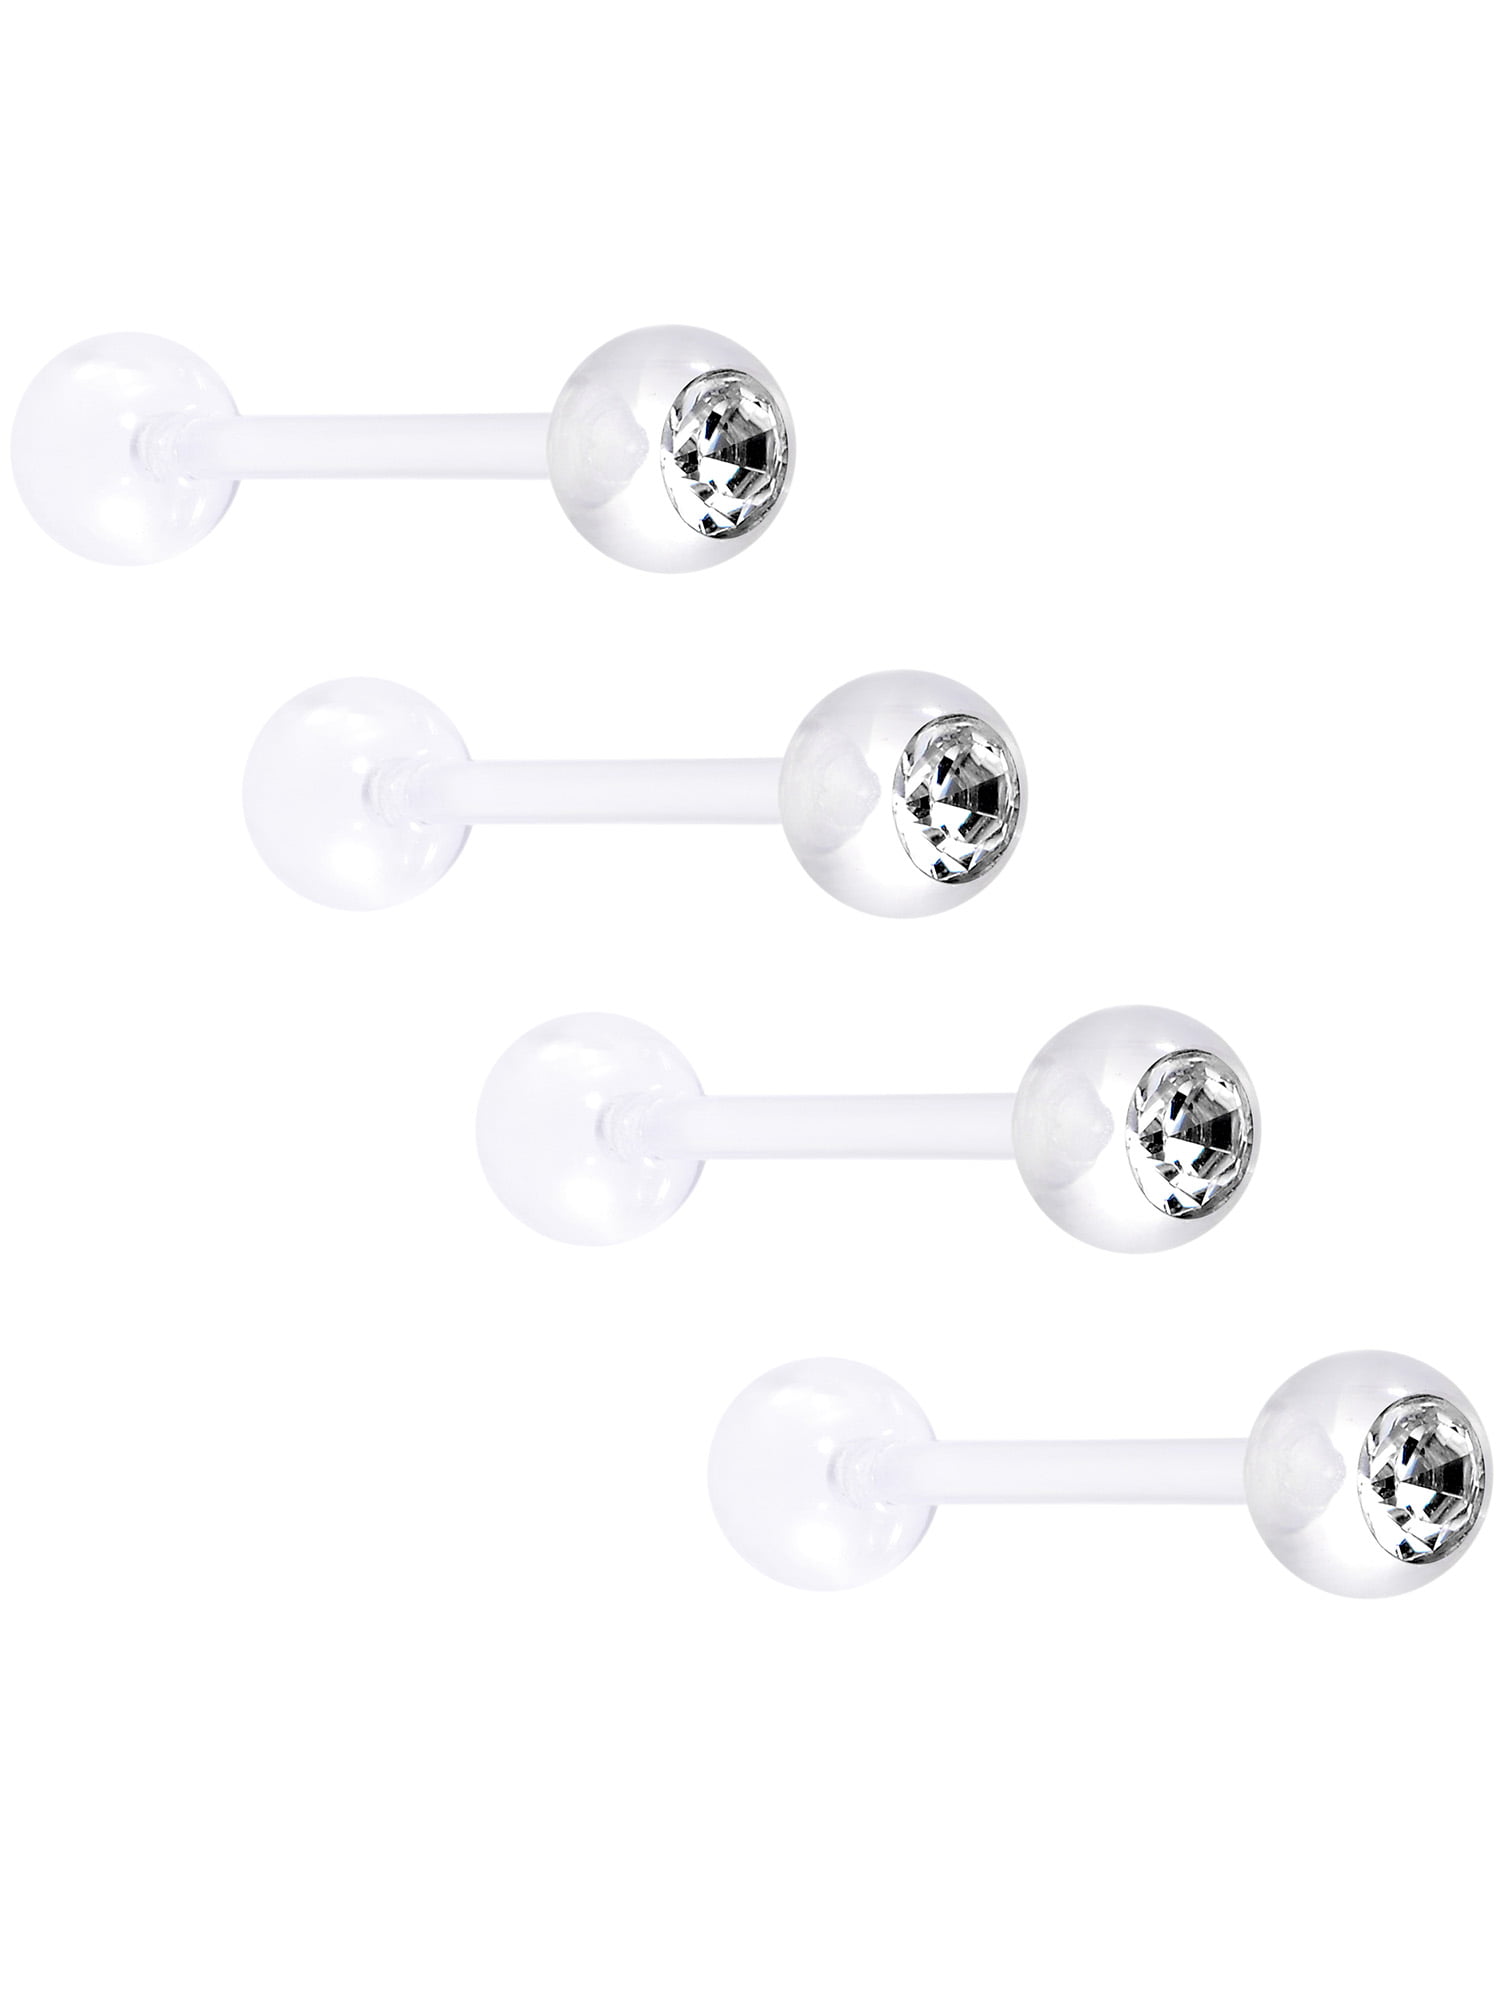 8PCS/Set Colorful Glitters Acrylic Barbell Ball Tongue Rings Piercing Jewelry 4H 